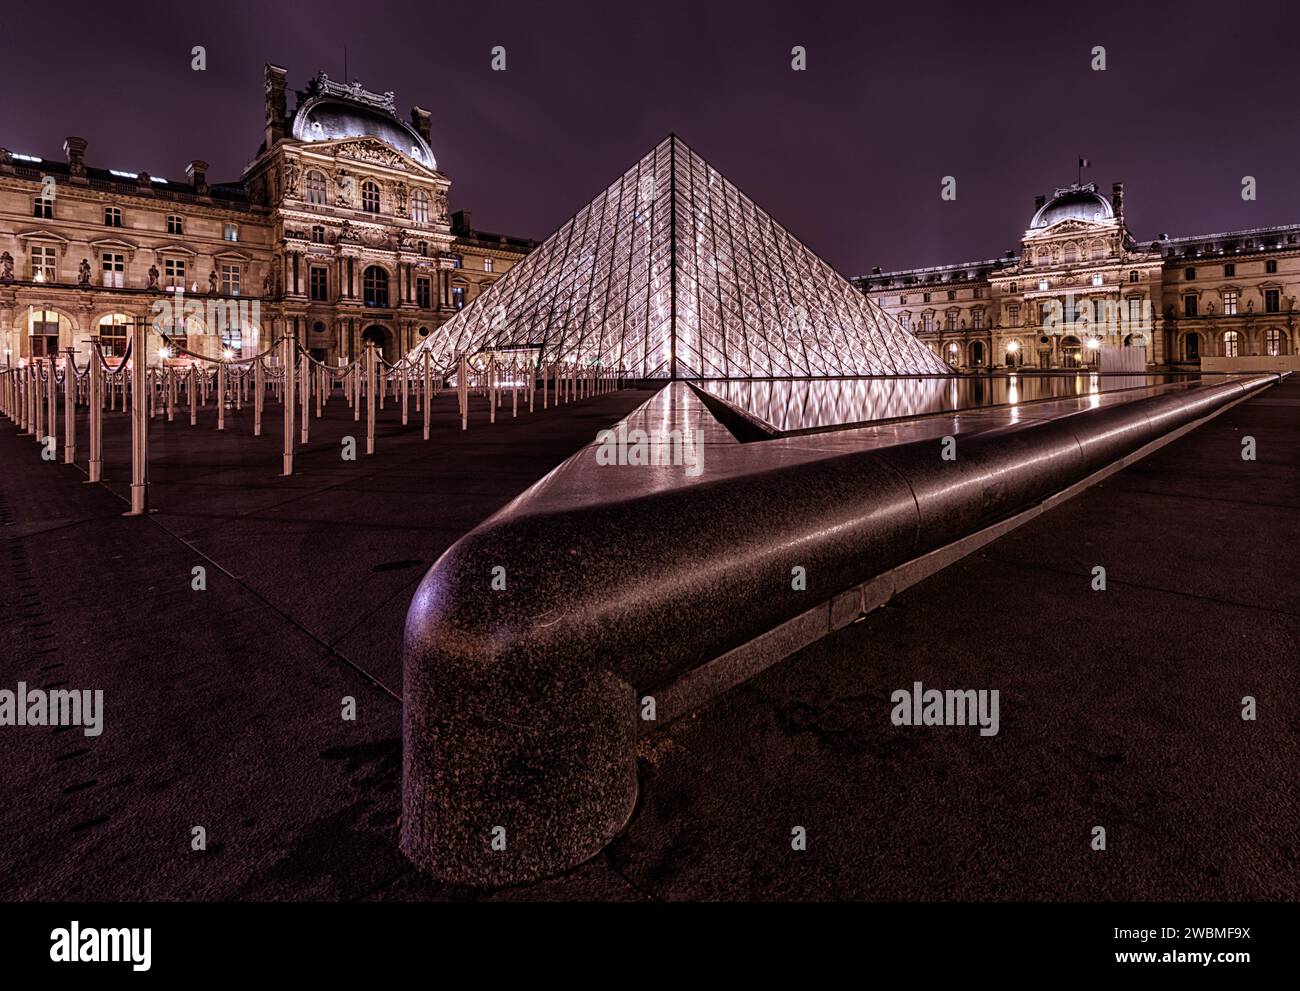 The Louvre, France's National Museum, illuminated at night Stock Photo